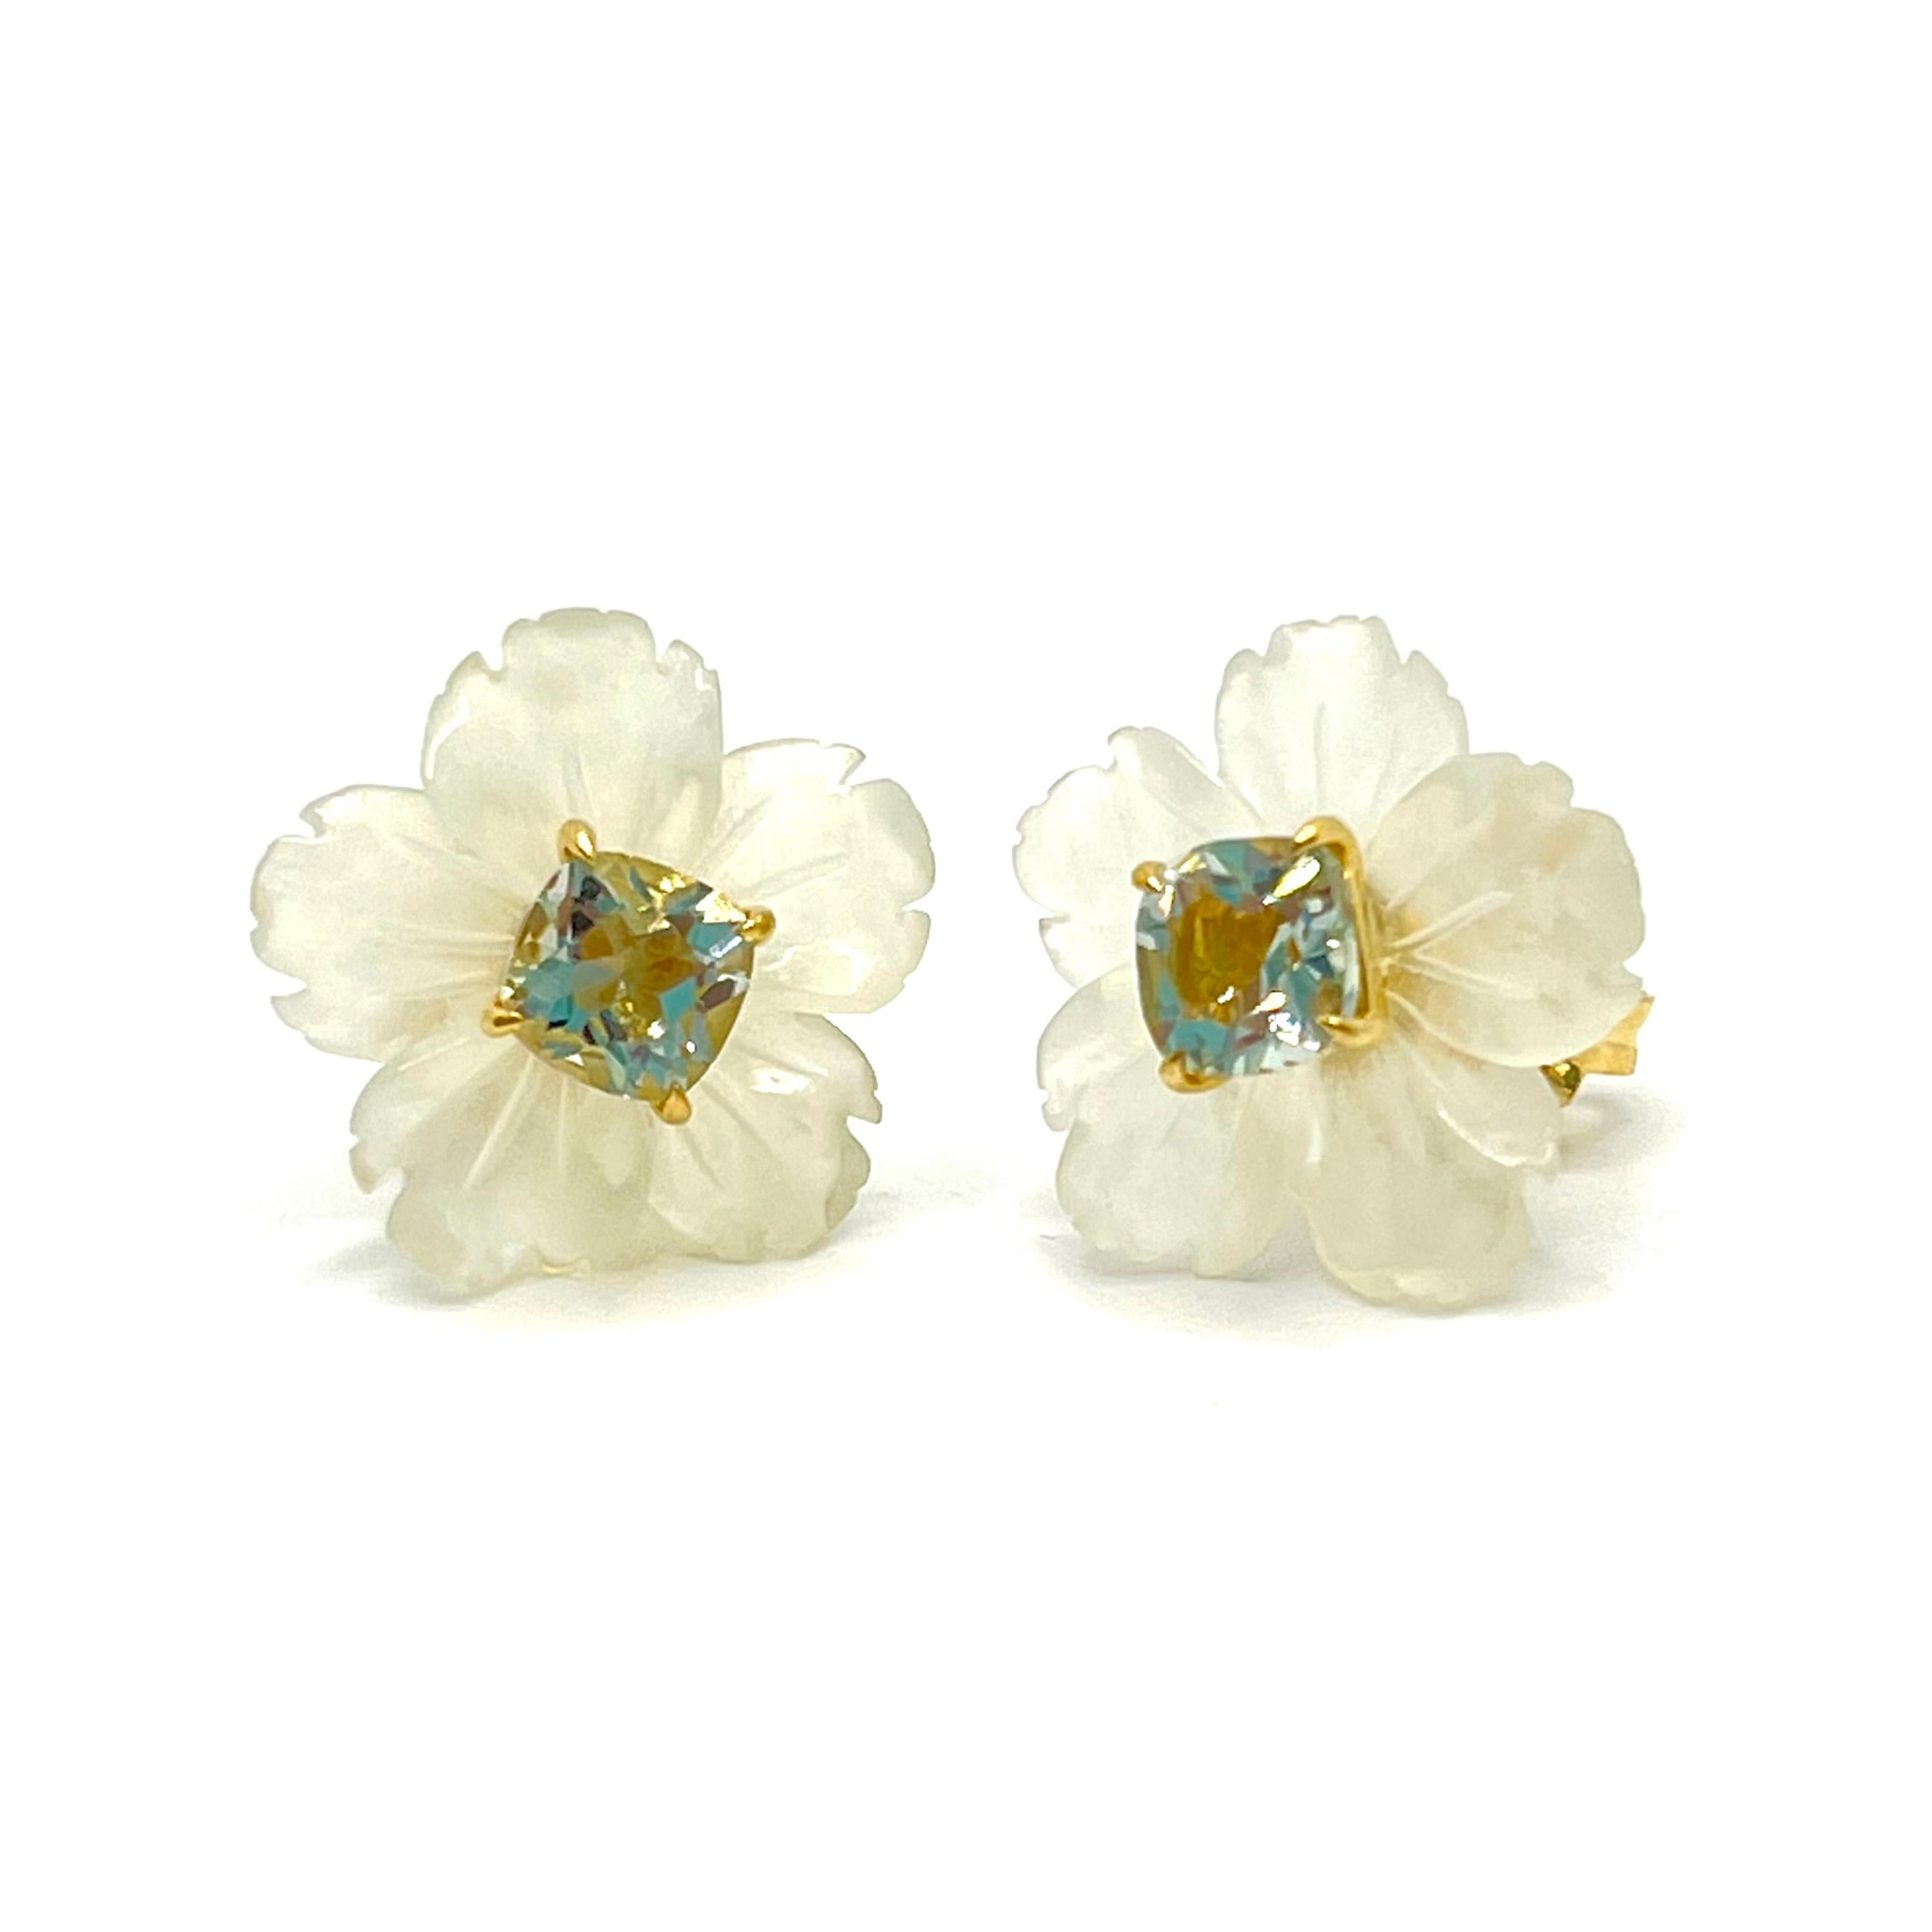 Bijoux Num's 18mm Carved Serpentine Flower and Cushion Prasiolite Vermeil Earrings

This gorgeous pair of earrings features 18mm frosted pale green serpentine carved into beautiful three dimension flower, adorned with genuine cushion-cut prasiolite